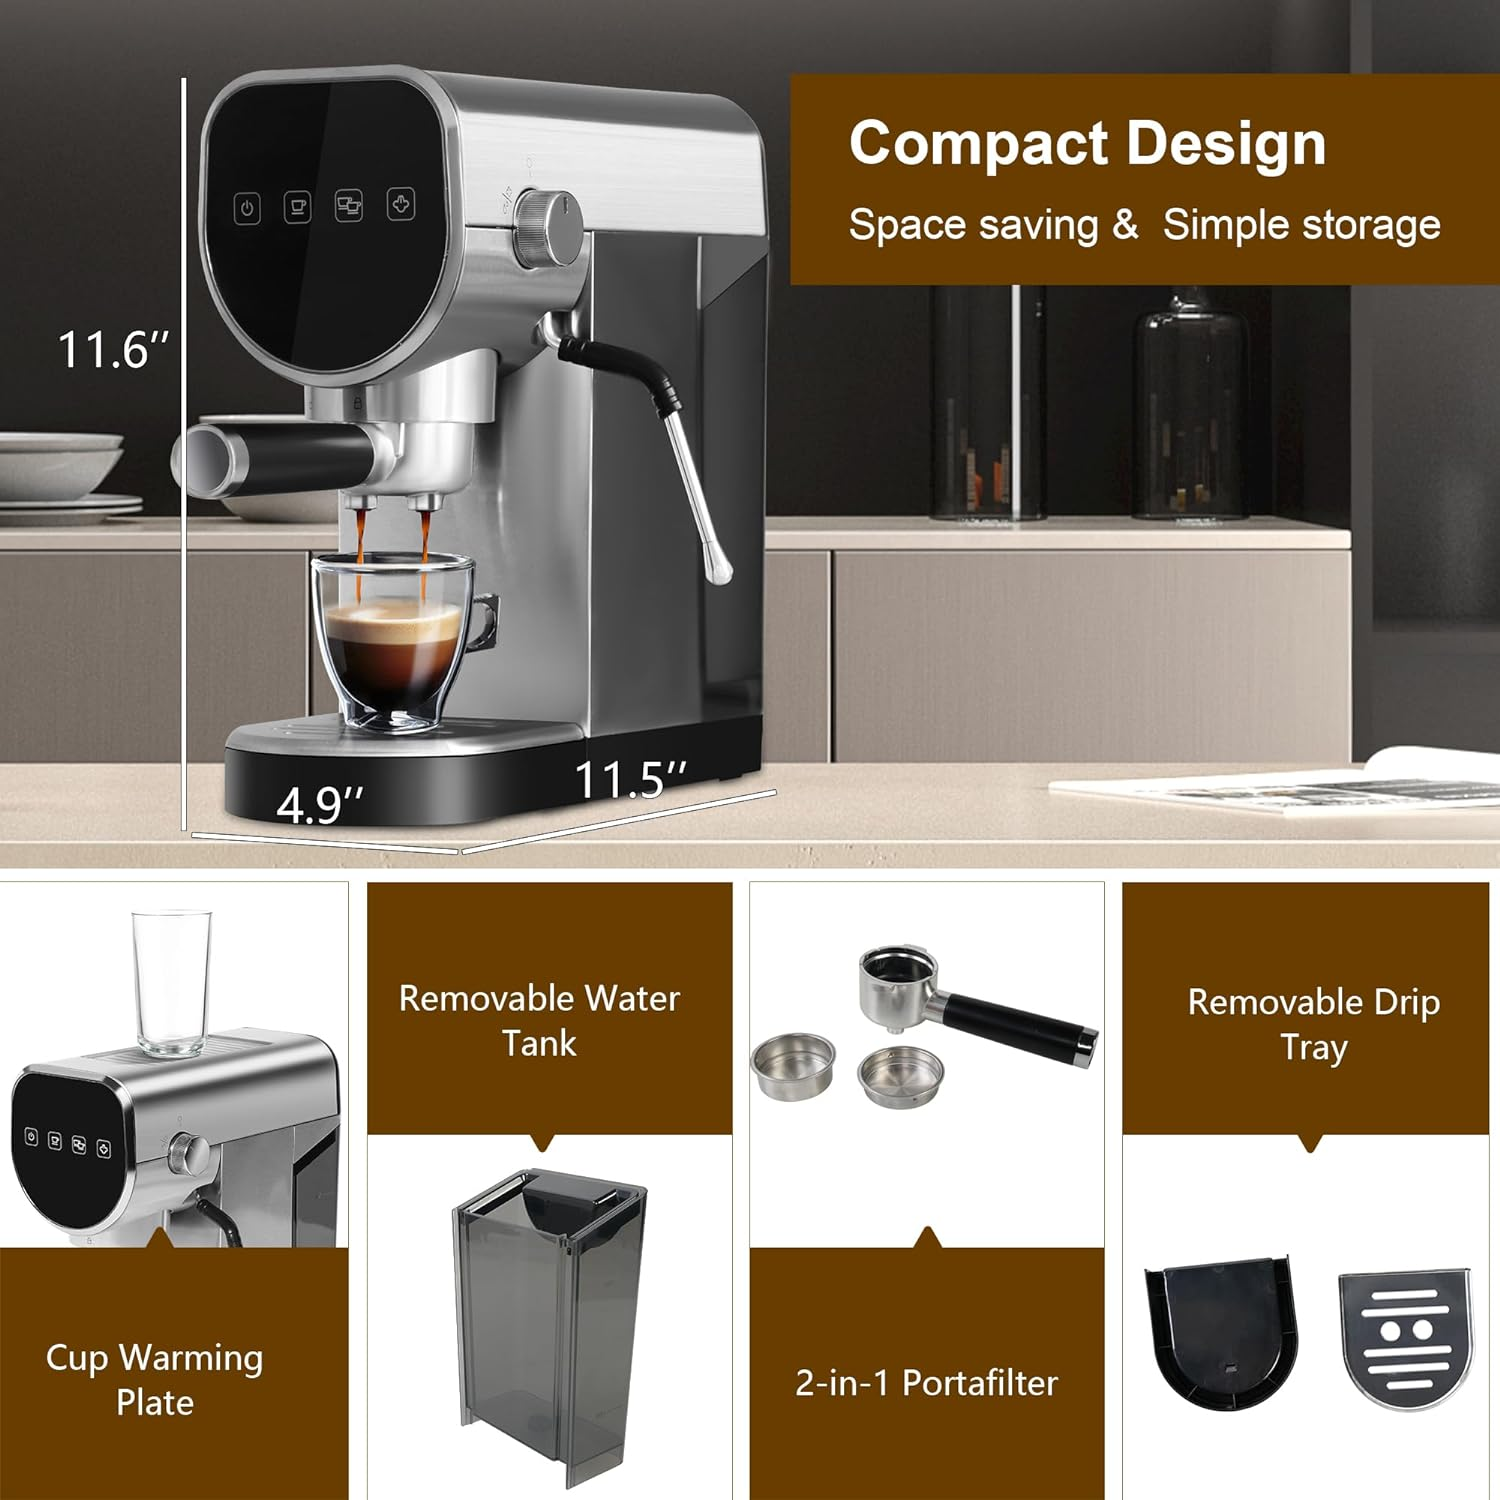 Manual Coffee Maker with Milk Frother Steam Wand, Compact Espresso Coffee Machine，Stainless Steel, 1250W